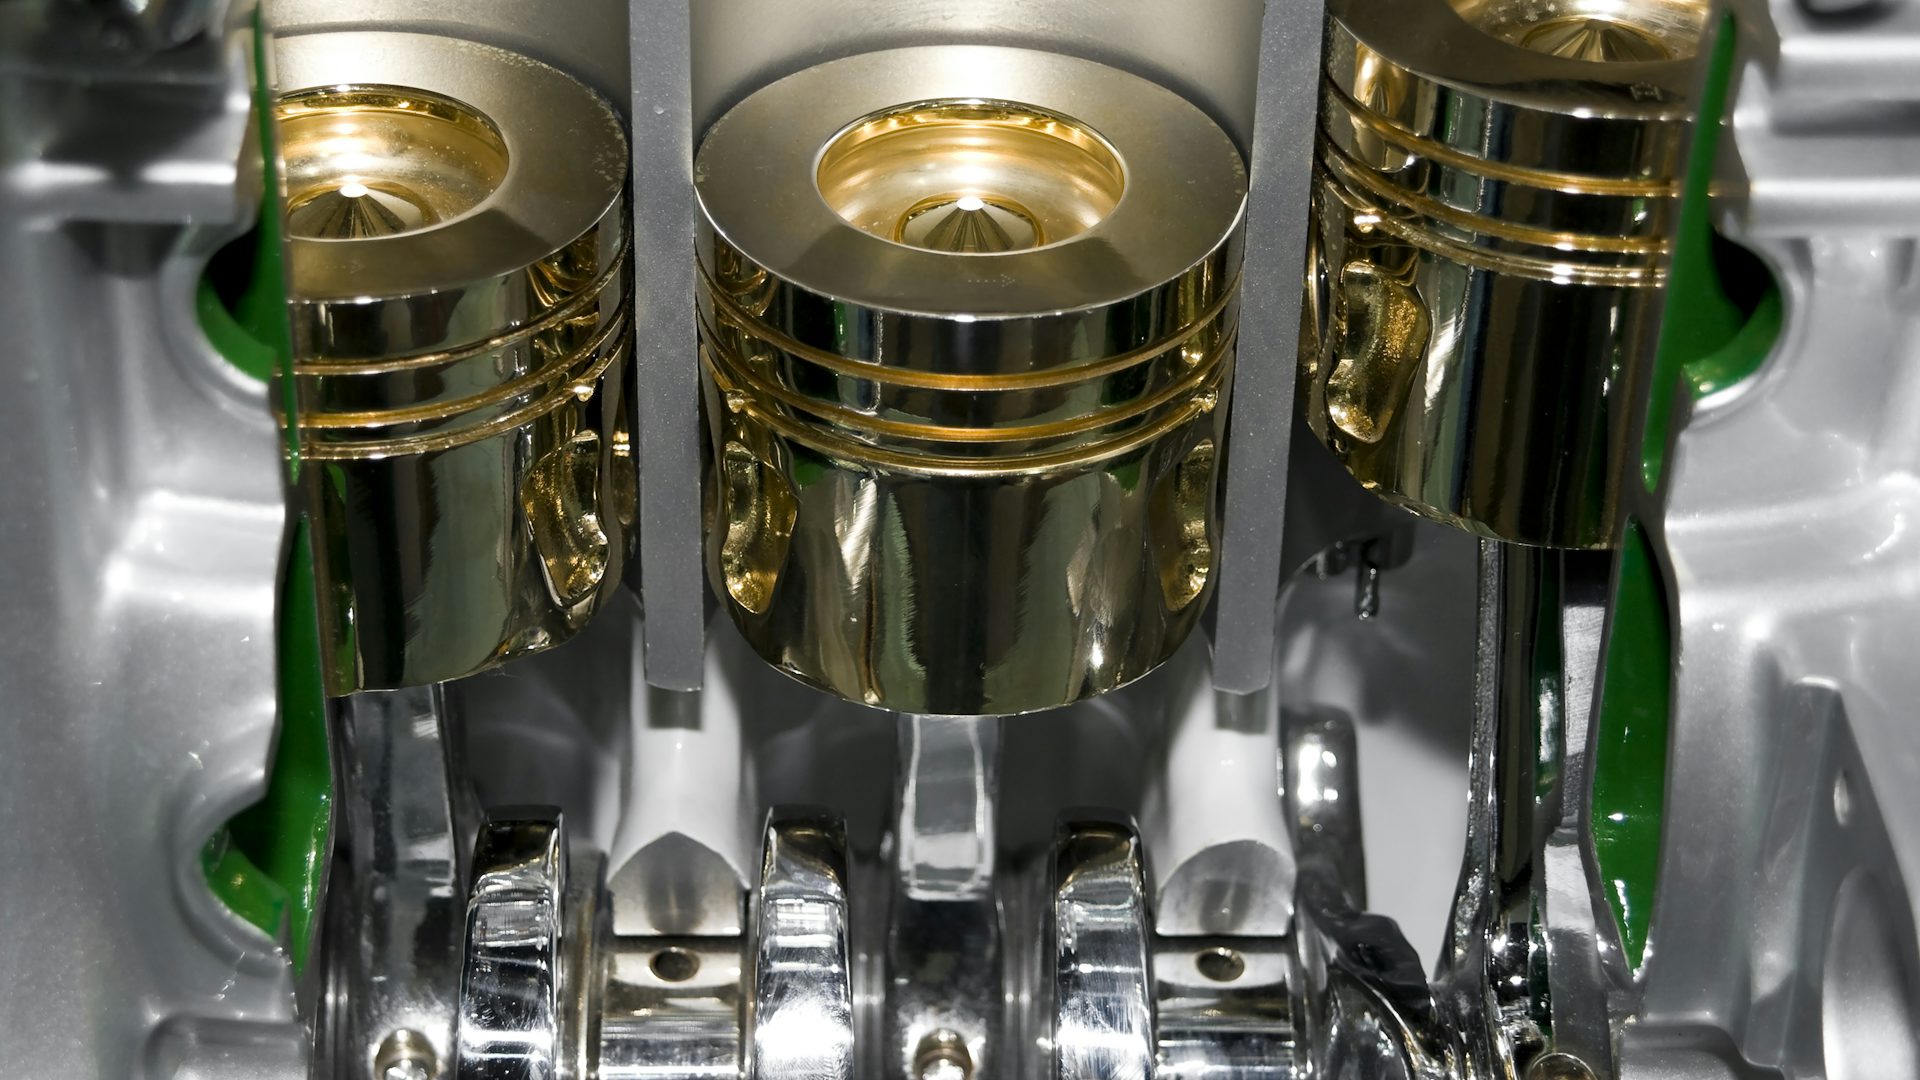 A gold-colored automobile cylinder block and car piston. This car piston can be designed Simcenter's Propulsion system simulation.